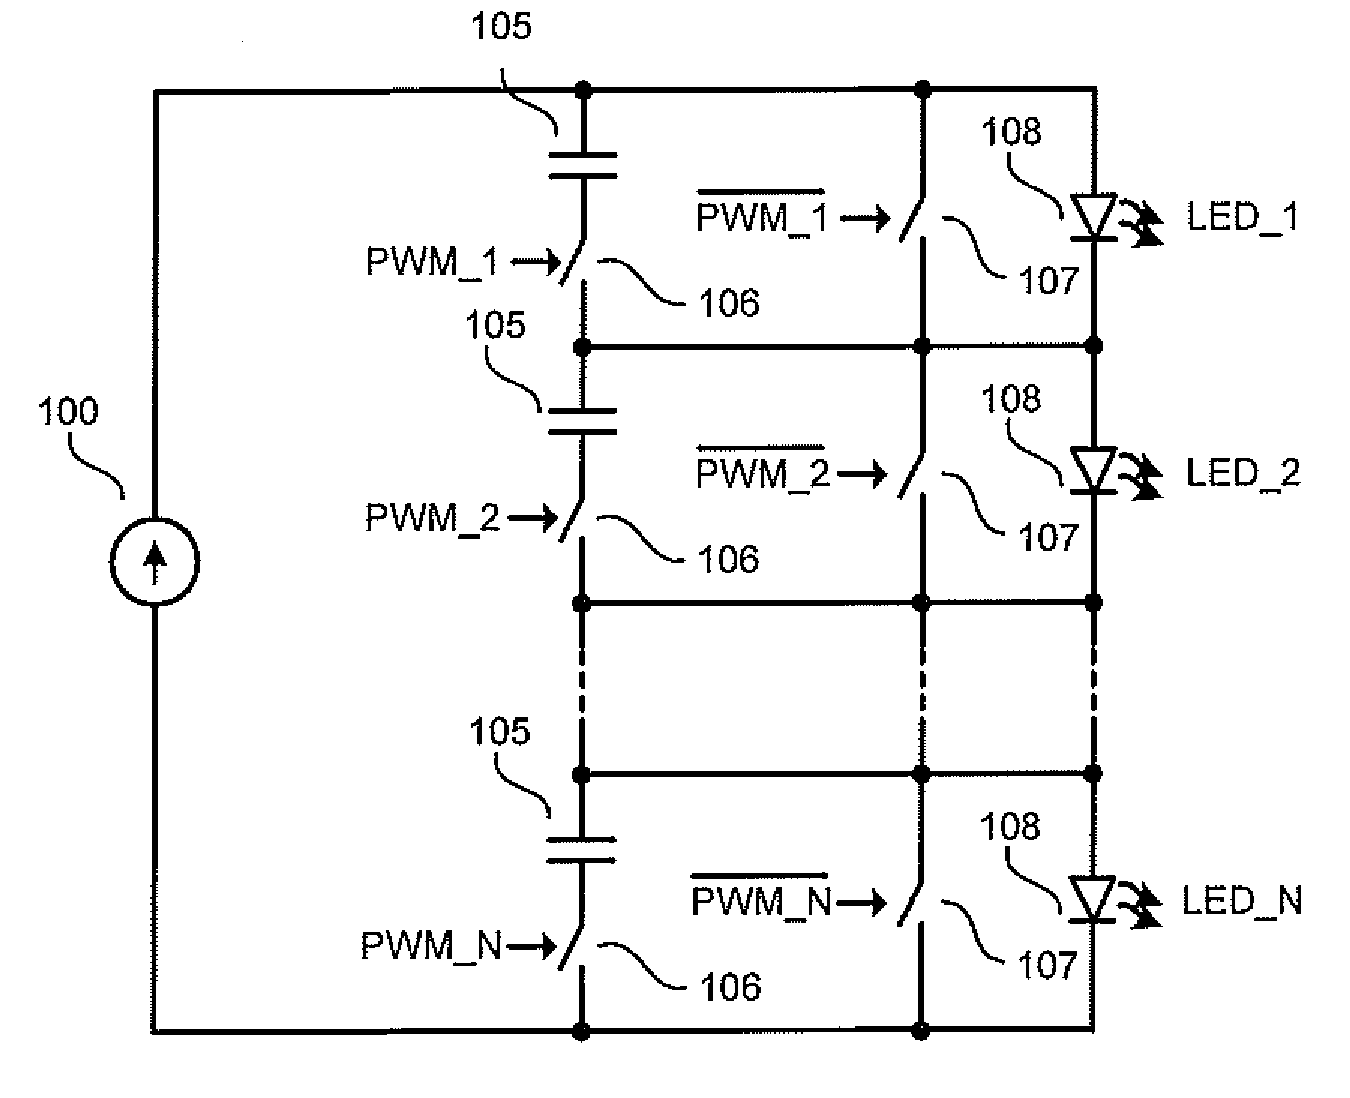 Shunting type pwm dimming circuit for individually controlling brightness of series connected leds operated at constant current and method therefor